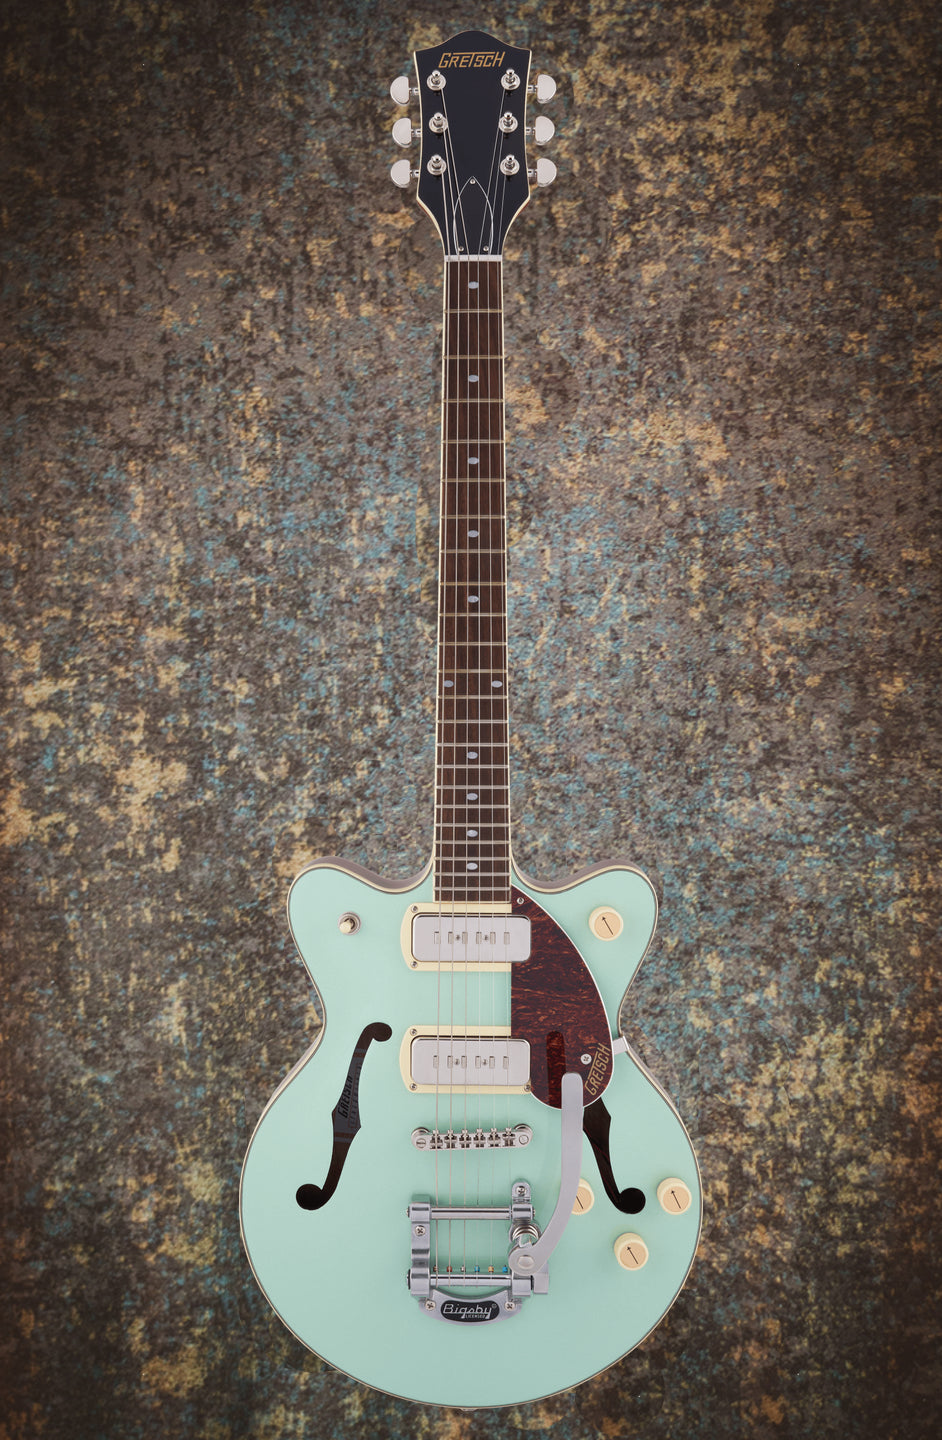 G2655T-P90 STREAMLINER™ CENTER BLOCK JR. DOUBLE-CUT P90 WITH BIGSBY® - Two-Tone Mint Metallic